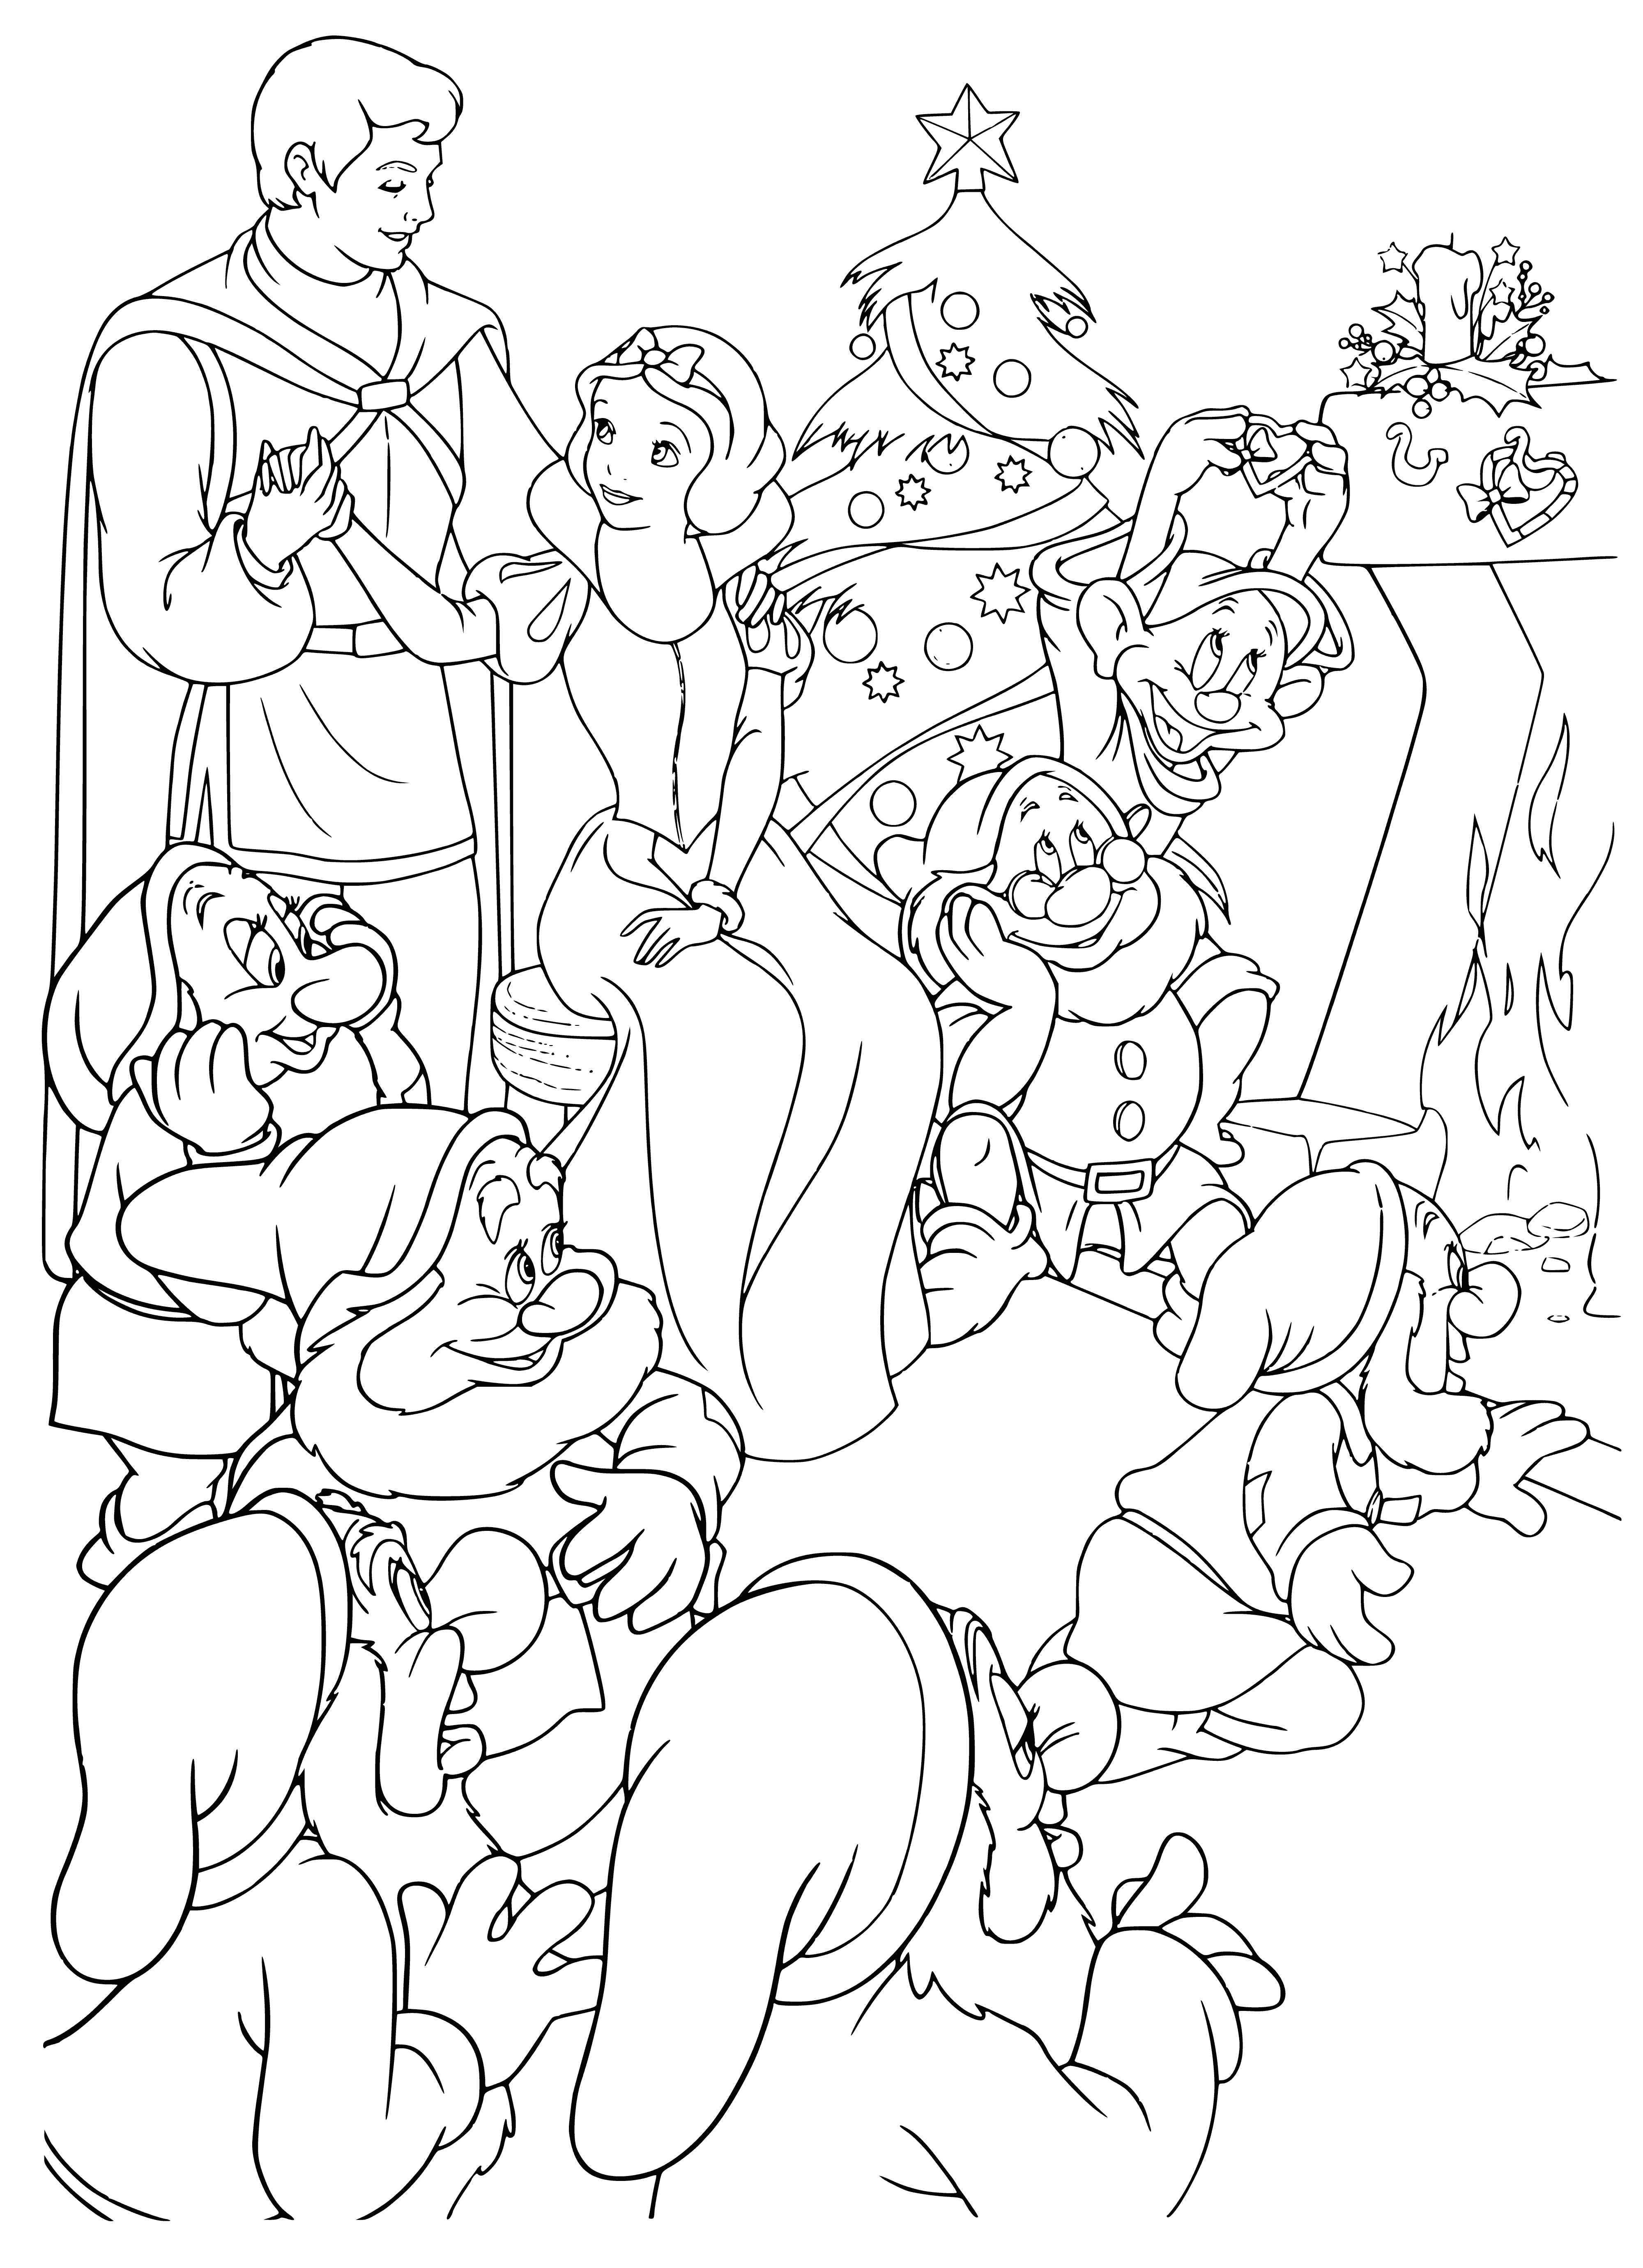 coloring page: Snow White and the Disney princesses all celebrate the new year together, with Snow White at the center of the frame. She looks ready to start the countdown! #happynewyear